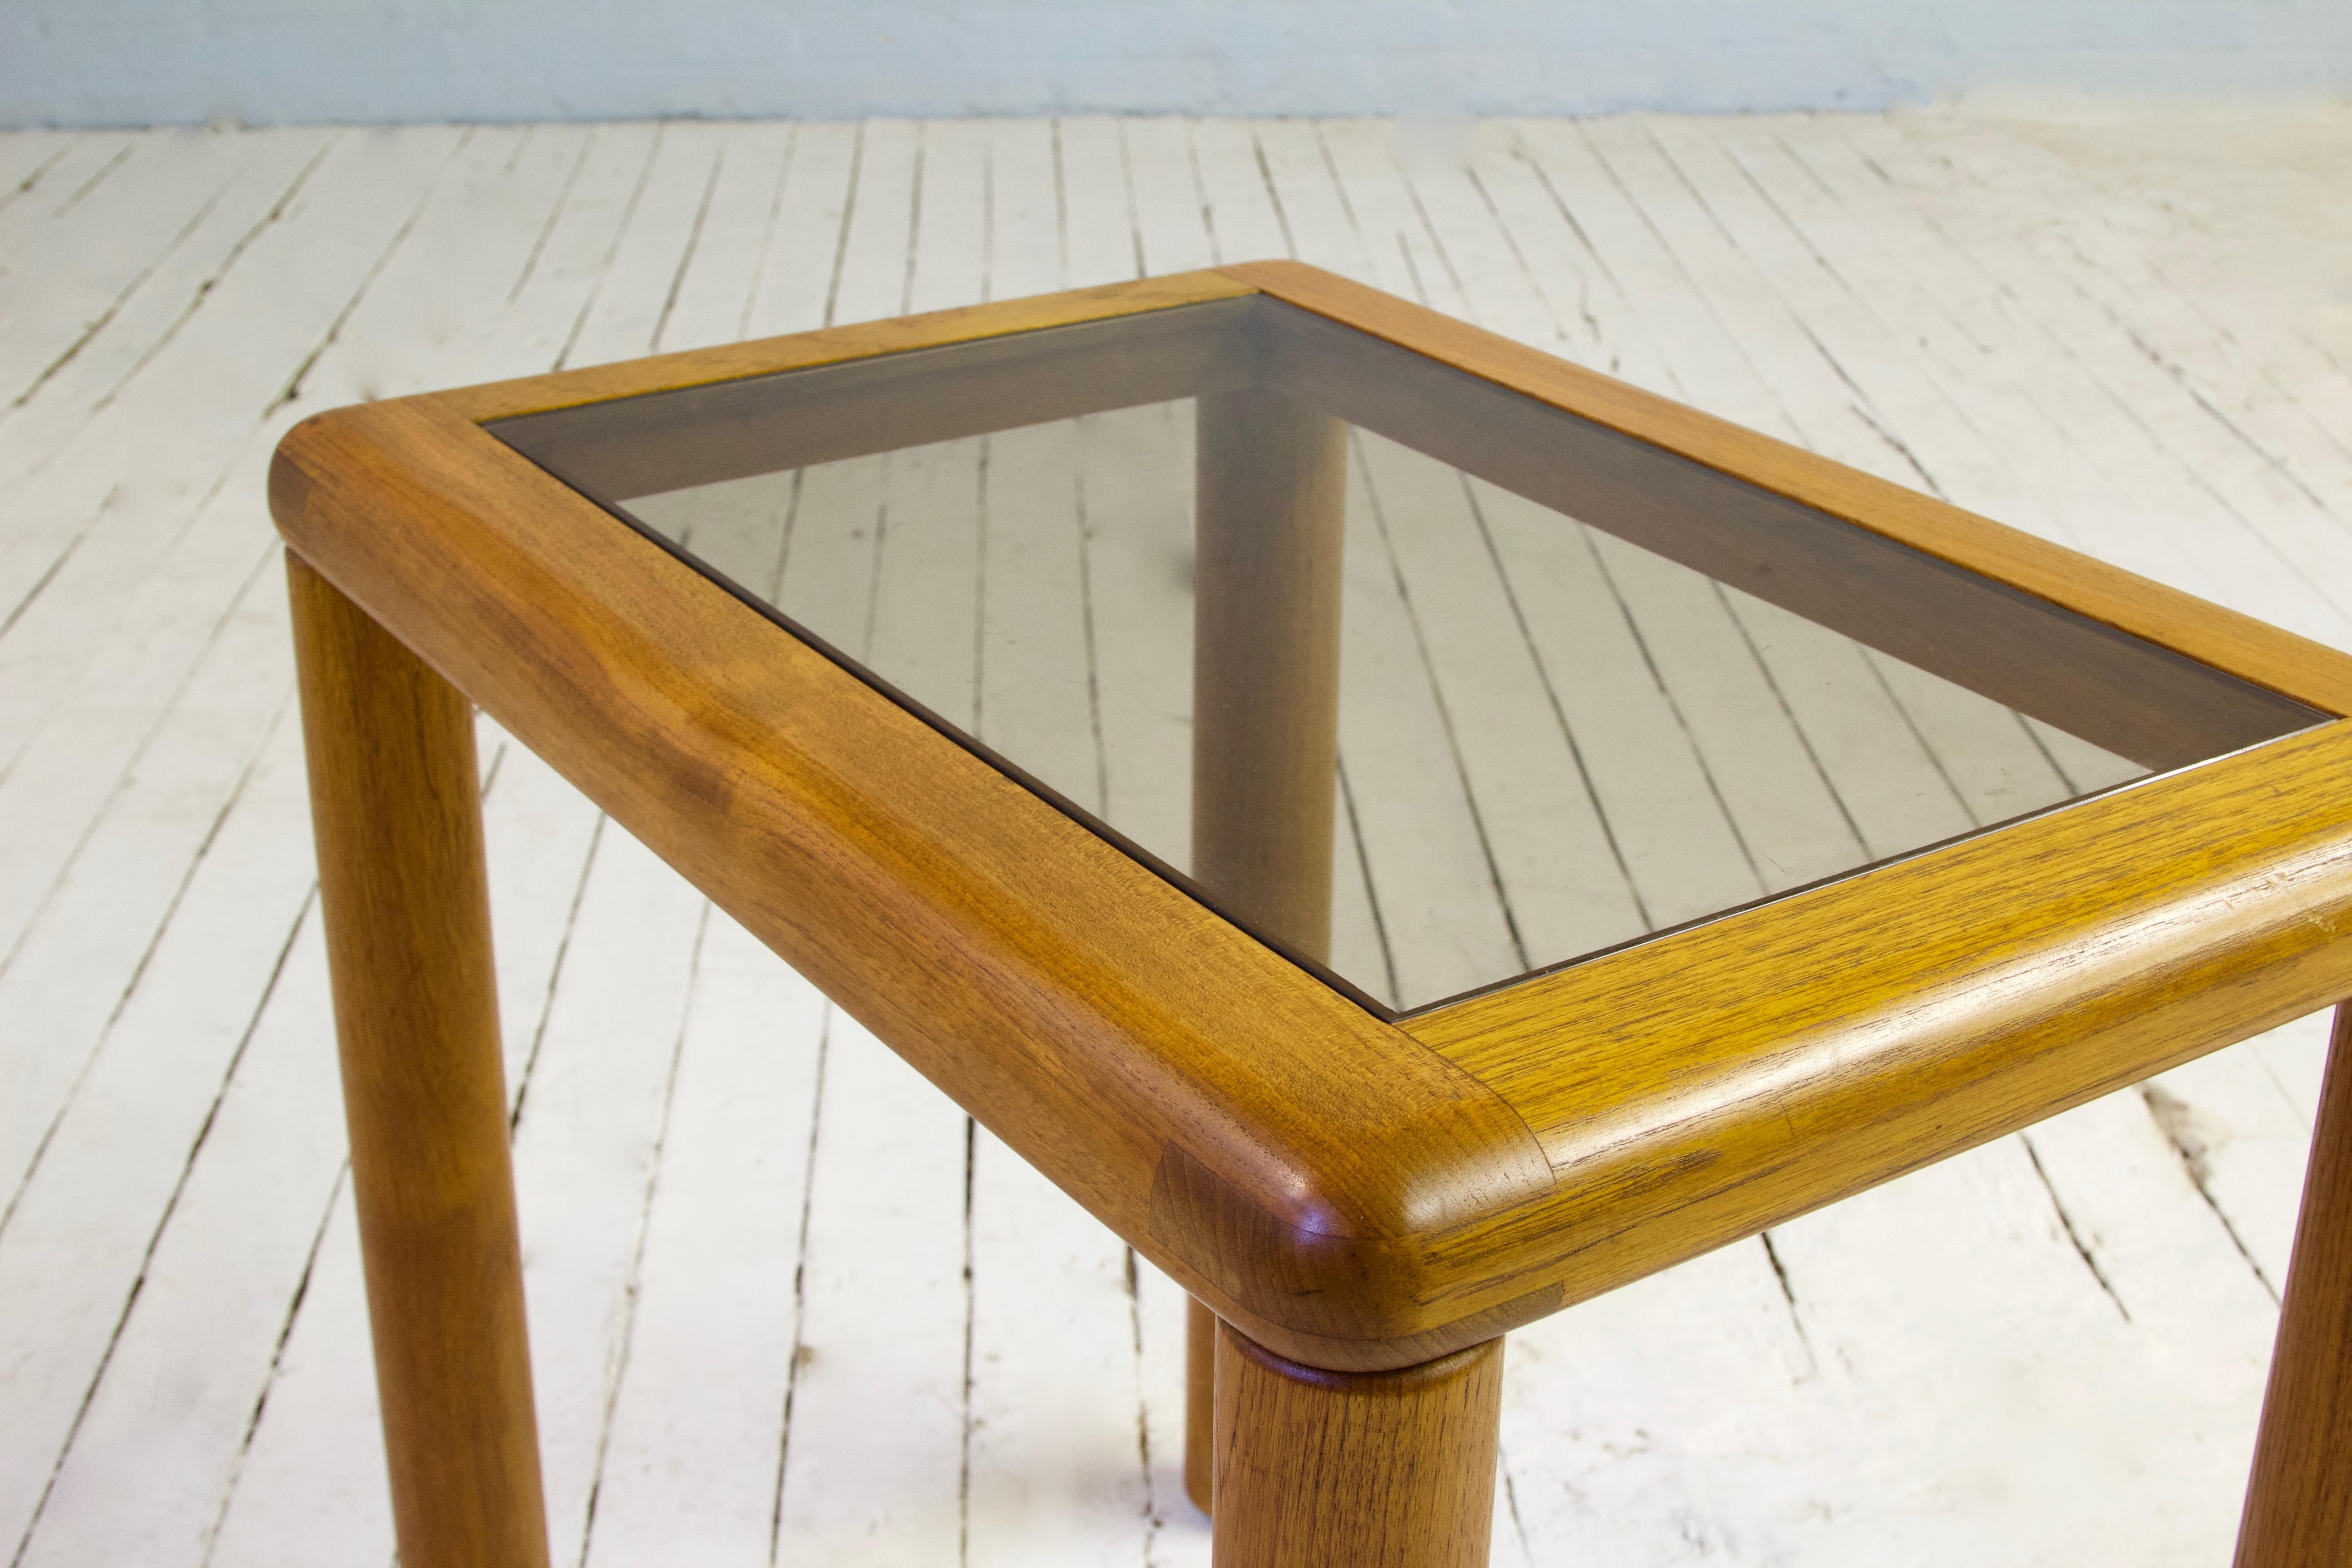 Smoked Glass Vintage Danish Side Table in Teak with Turned Legs, 1960s For Sale